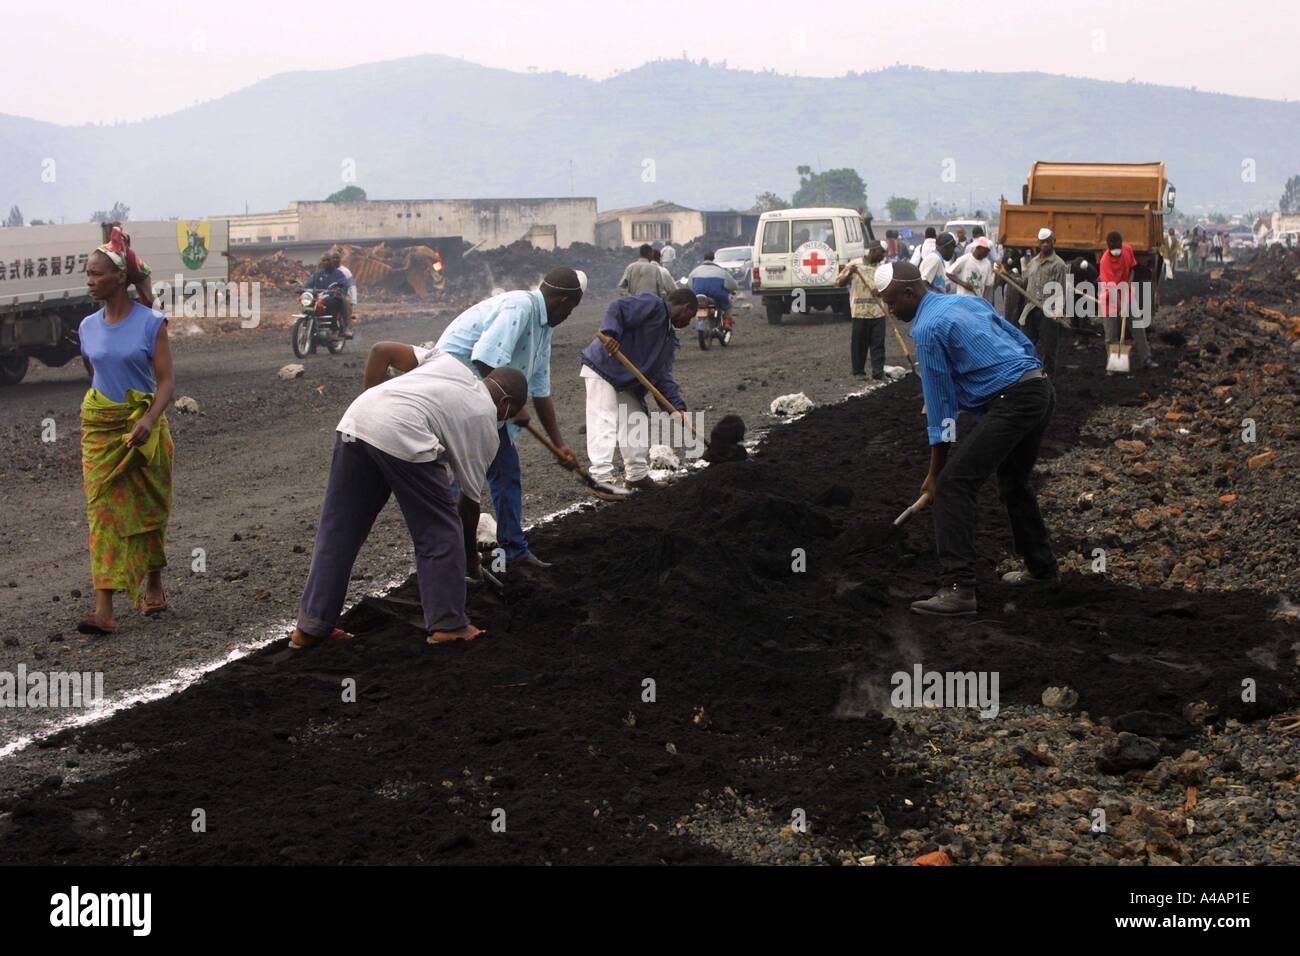 Jan 2002 Goma; Within one week of the volcanic eruption that devastated the town, workers are putting down lava gravel to create a pavement.  Jan 2002 Goma Stock Photo